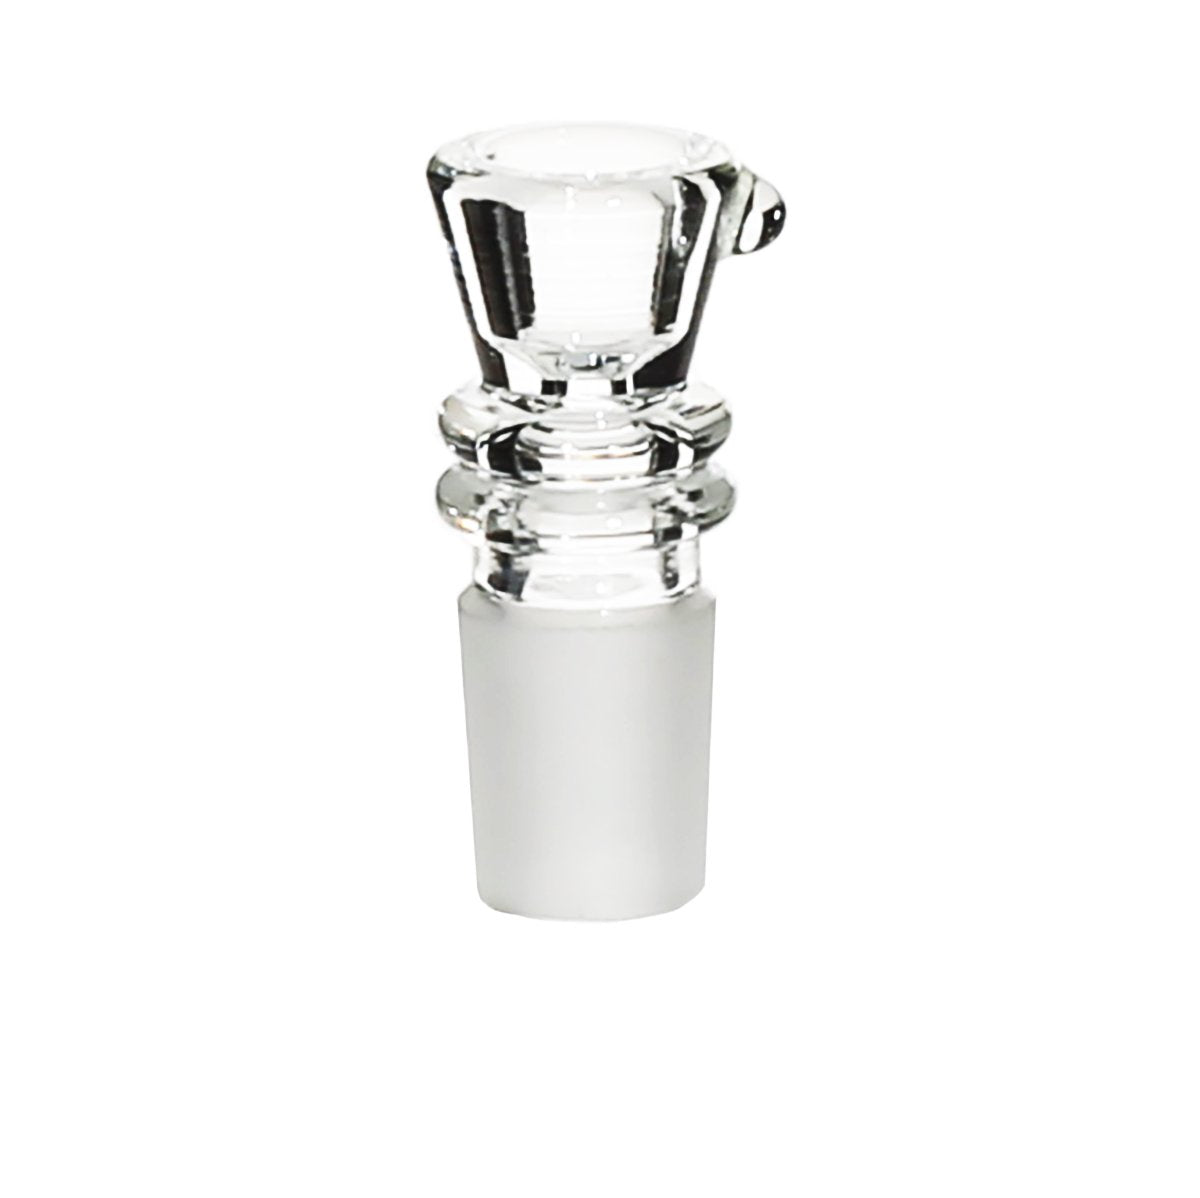 19Mm Funnel Bowl With Rings - Clear Accessories